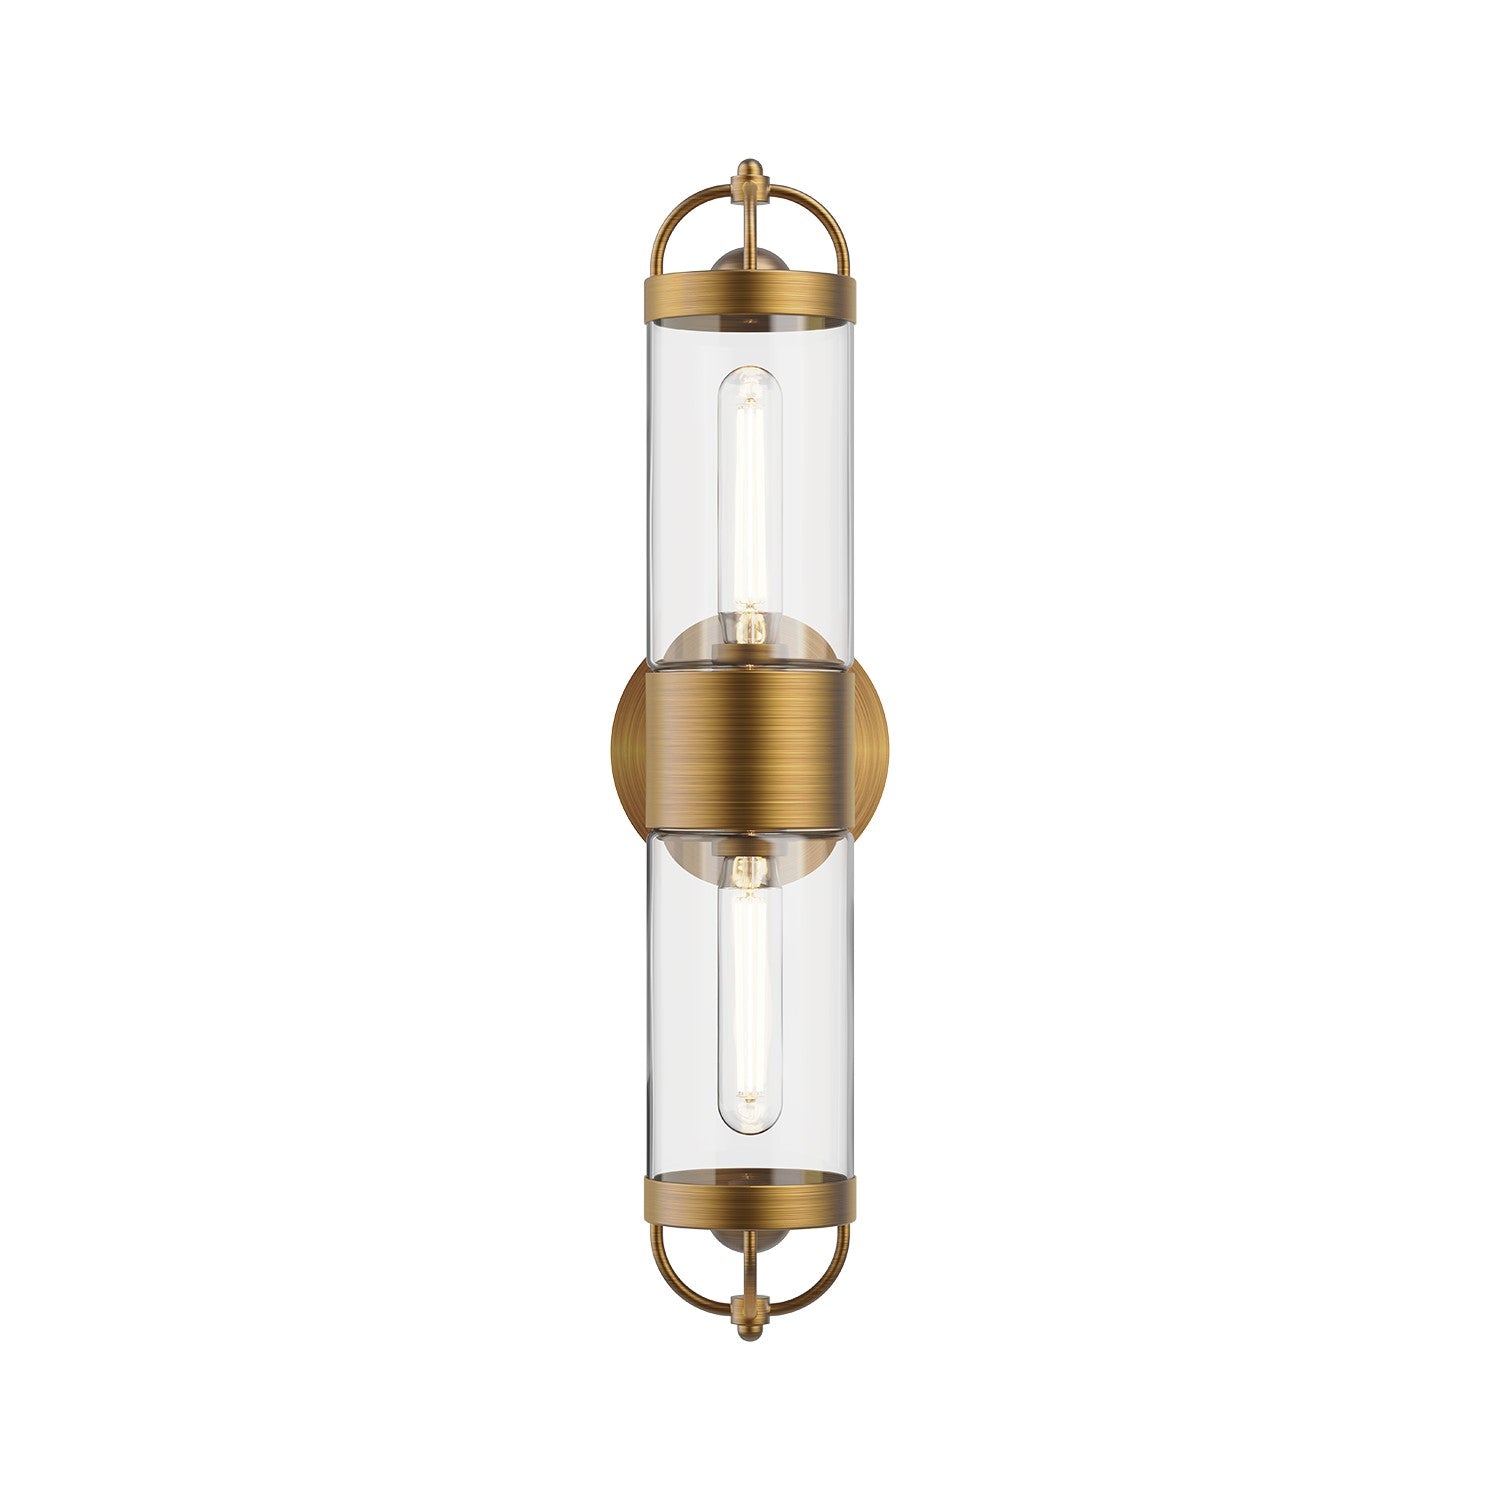 Alora Canada - WV461102AG - Two Light Wall Sconce - Lancaster - Aged Gold